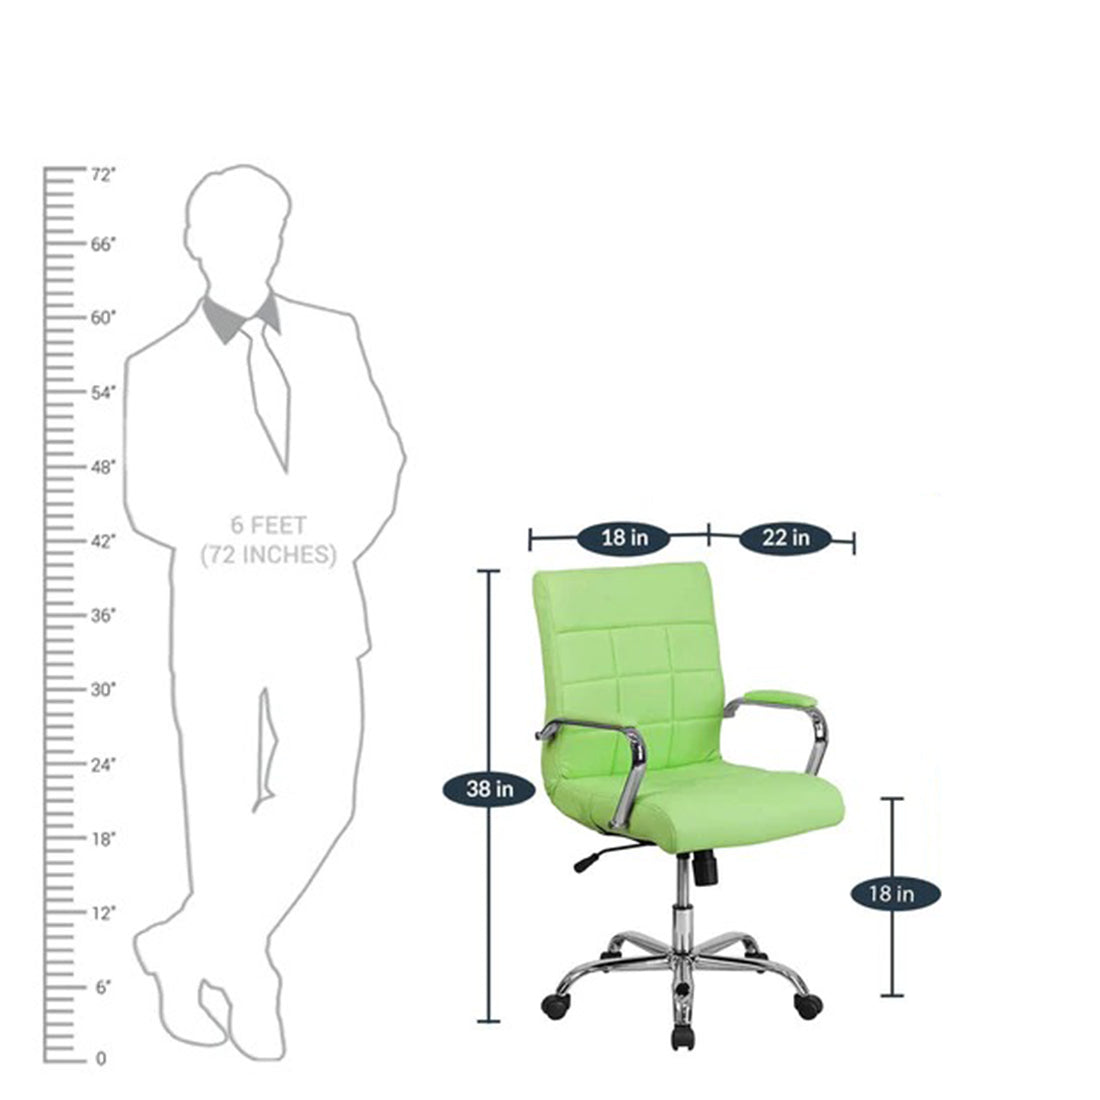 Detec™ Executive Office Chair - 4 Different Color